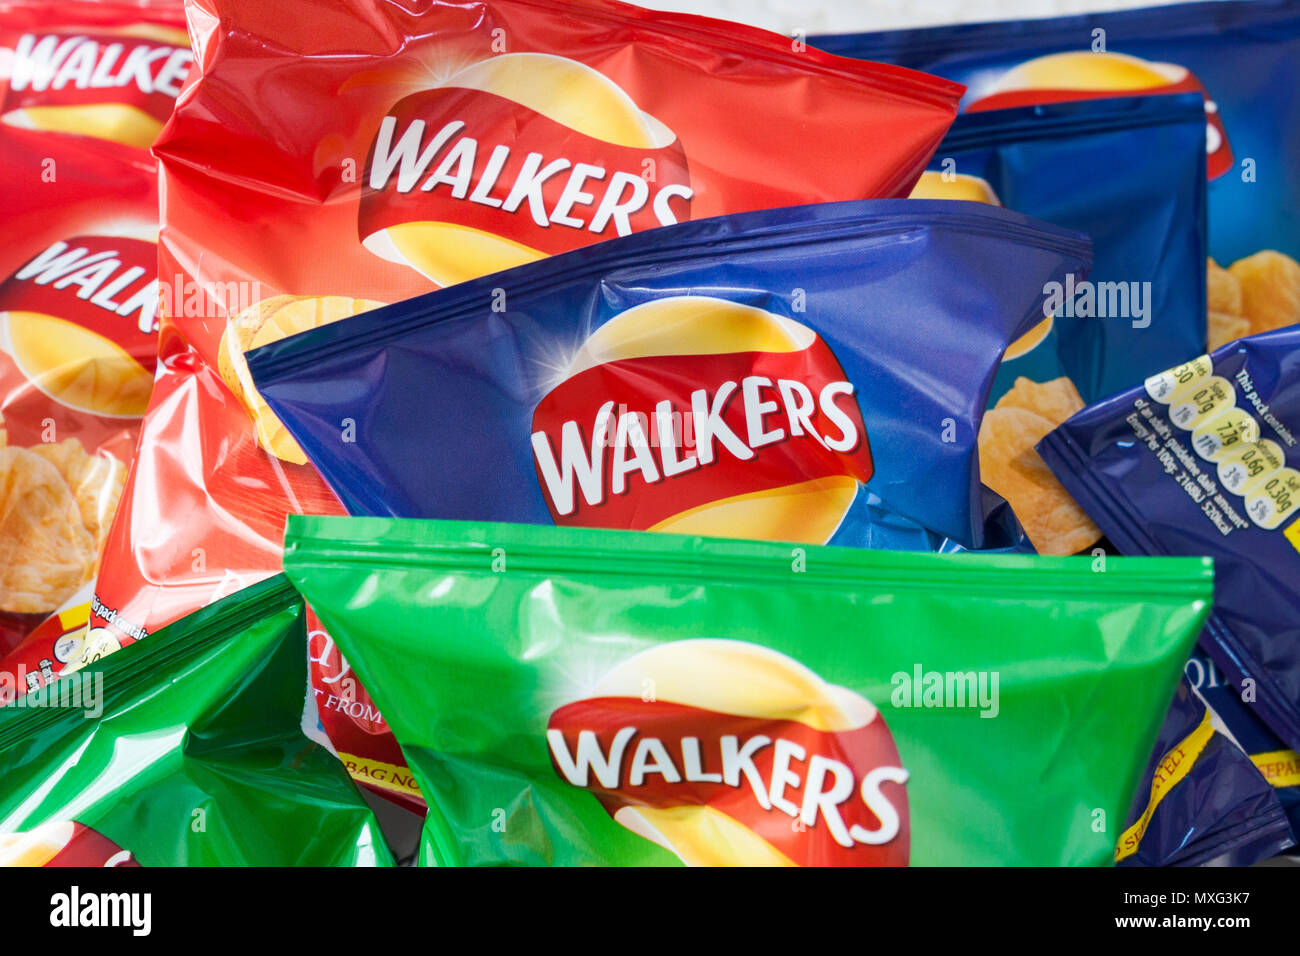 Walkers crisps packets assorted flavours Stock Photo